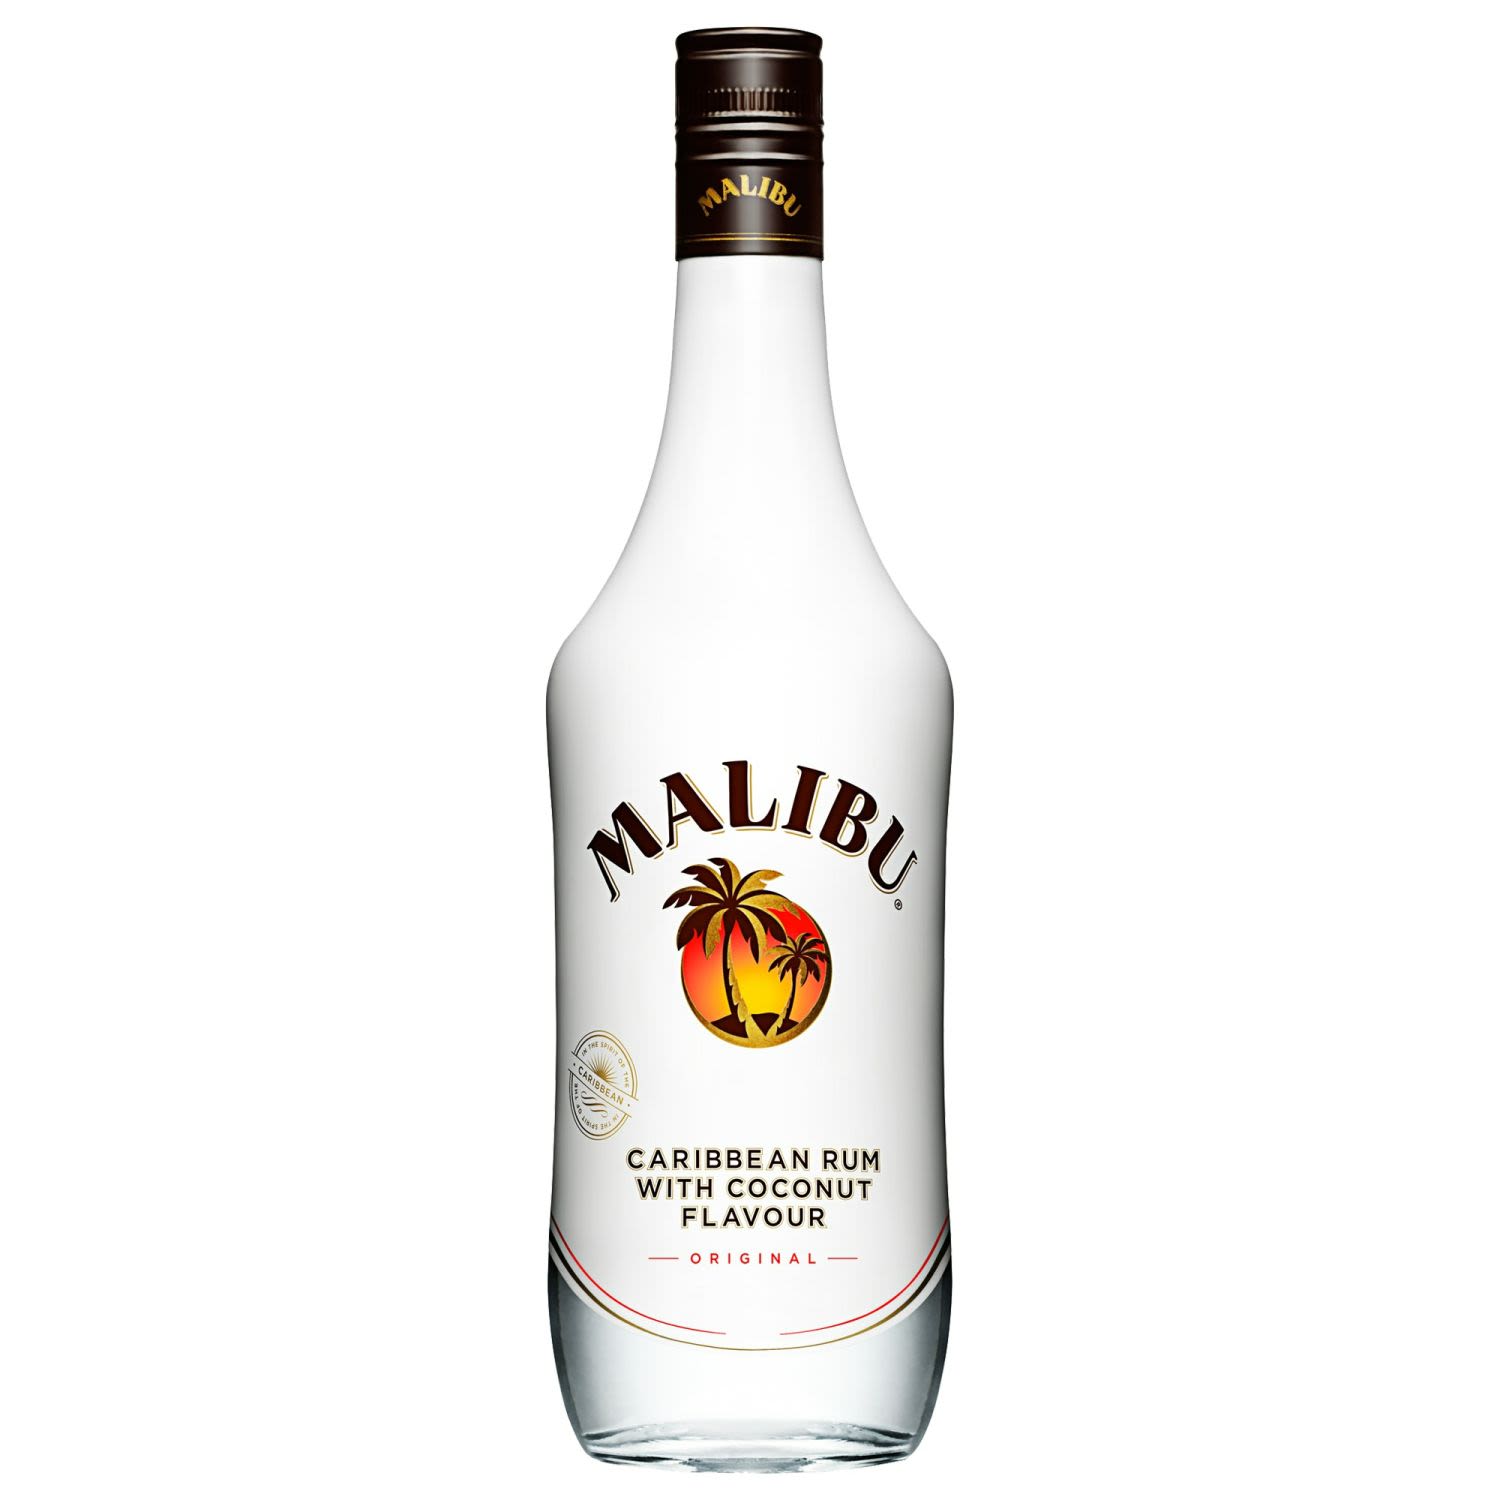 An iconic coconut spiced Rum that is a must have in many tropical cocktails. Malibu on the rocks, makes a livley, refreshing drink on a hot summer's night.<br /> <br />Alcohol Volume: 21.00%<br /><br />Pack Format: Bottle<br /><br />Standard Drinks: 12</br /><br />Pack Type: Bottle<br /><br />Country of Origin: USA<br />